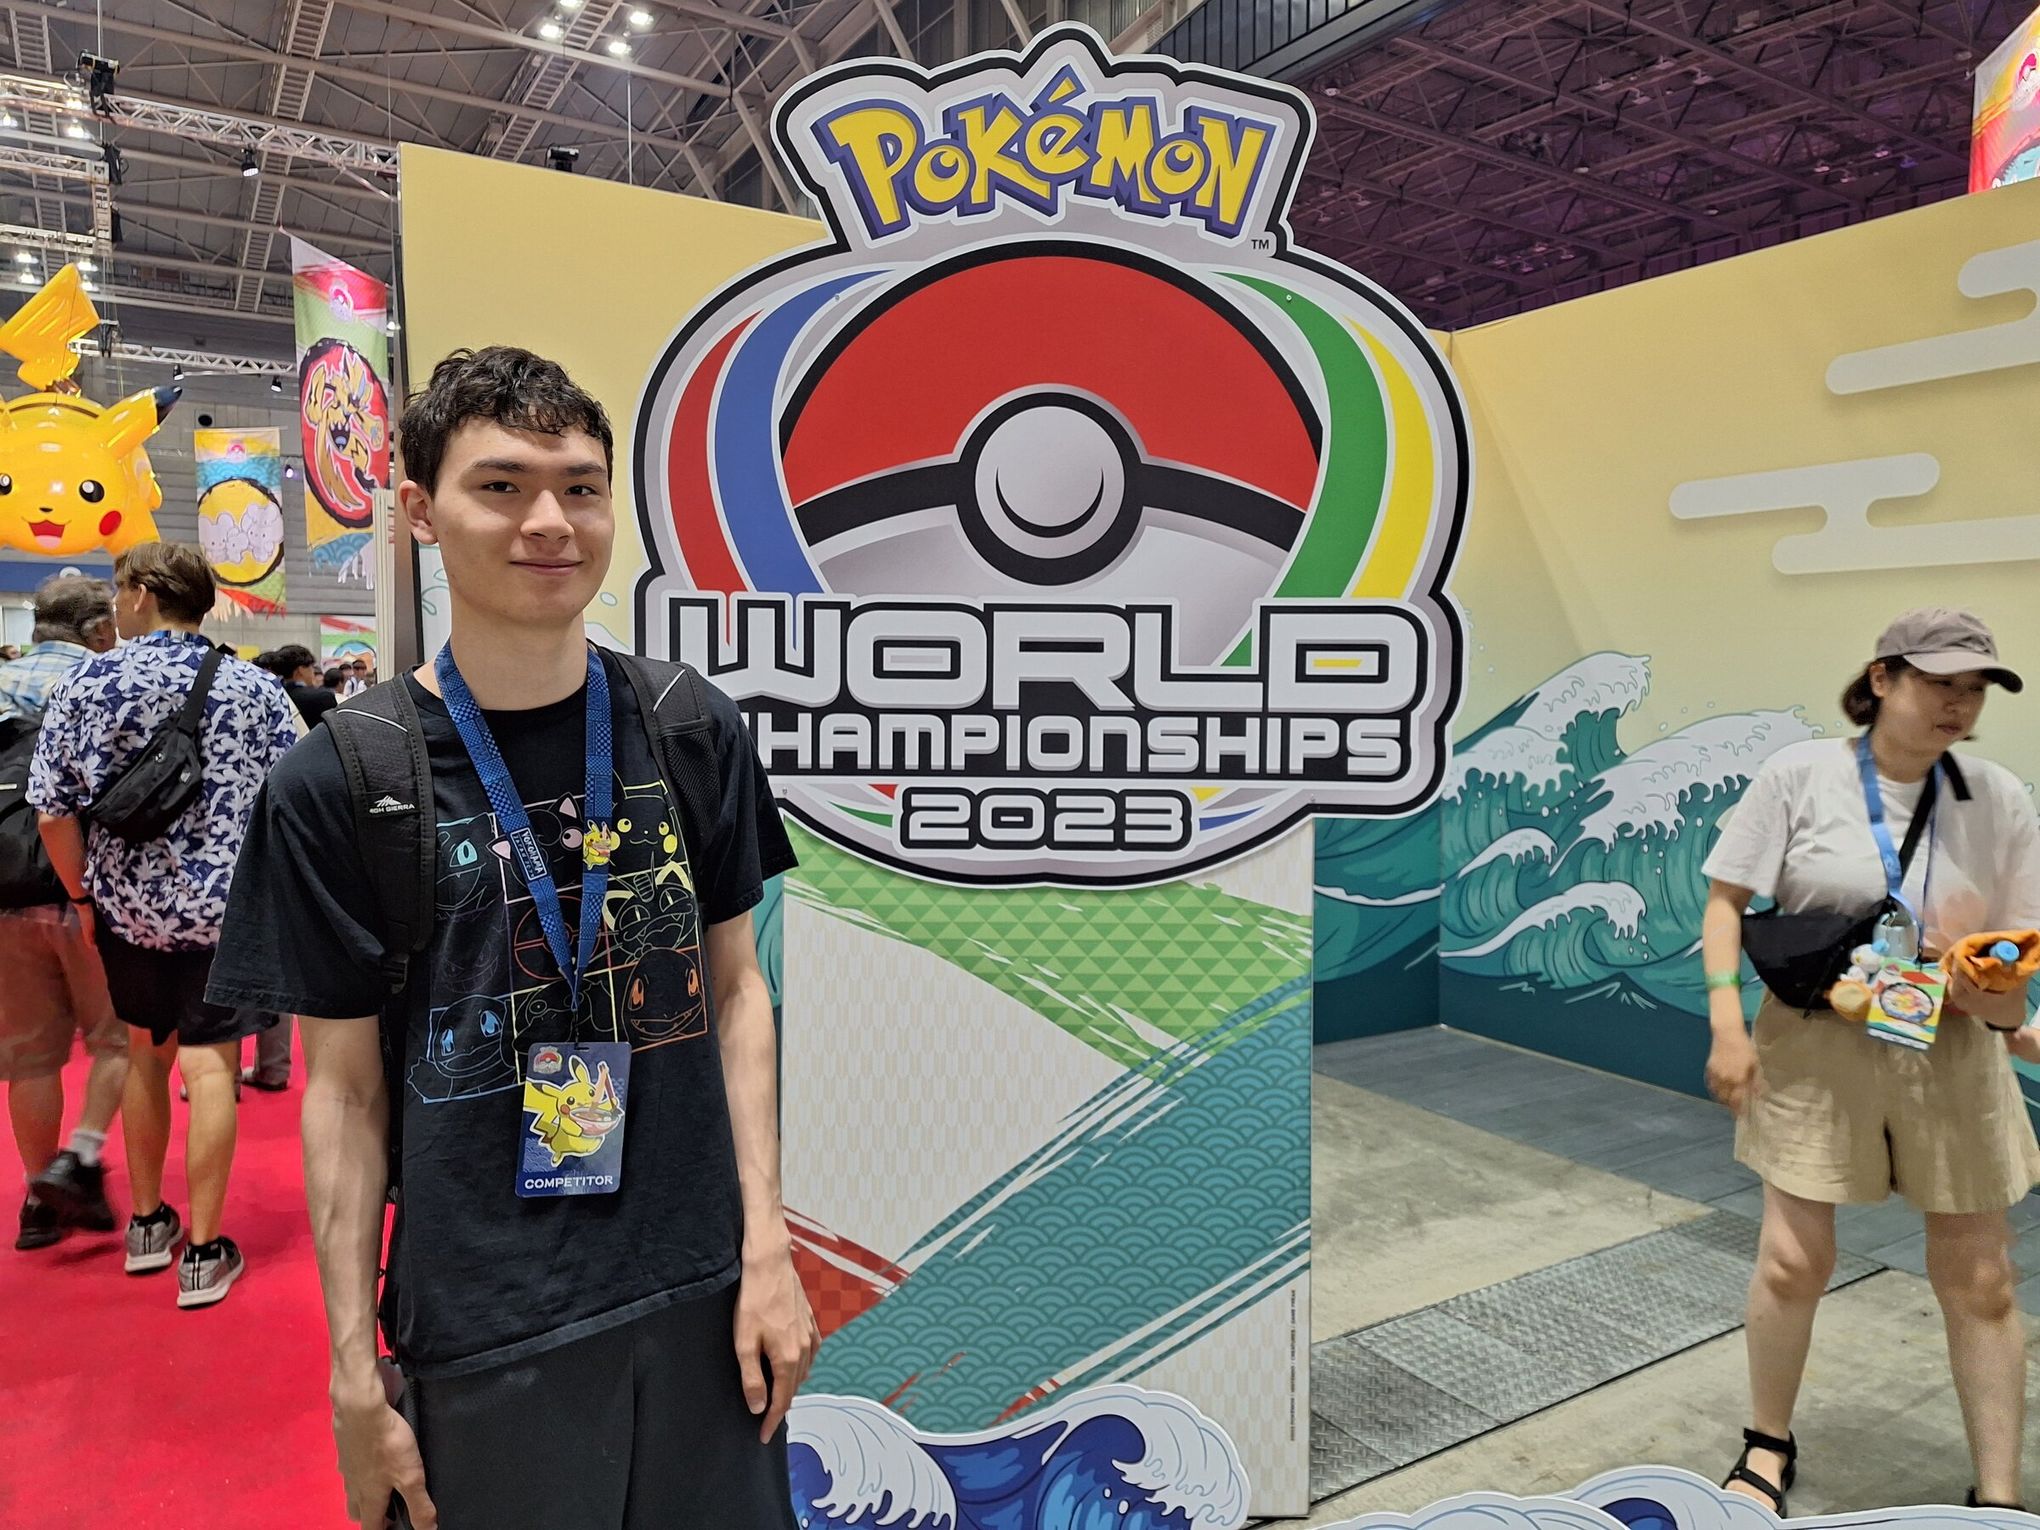 Get a First Look at Plans for the 2023 Pokémon Championship Series